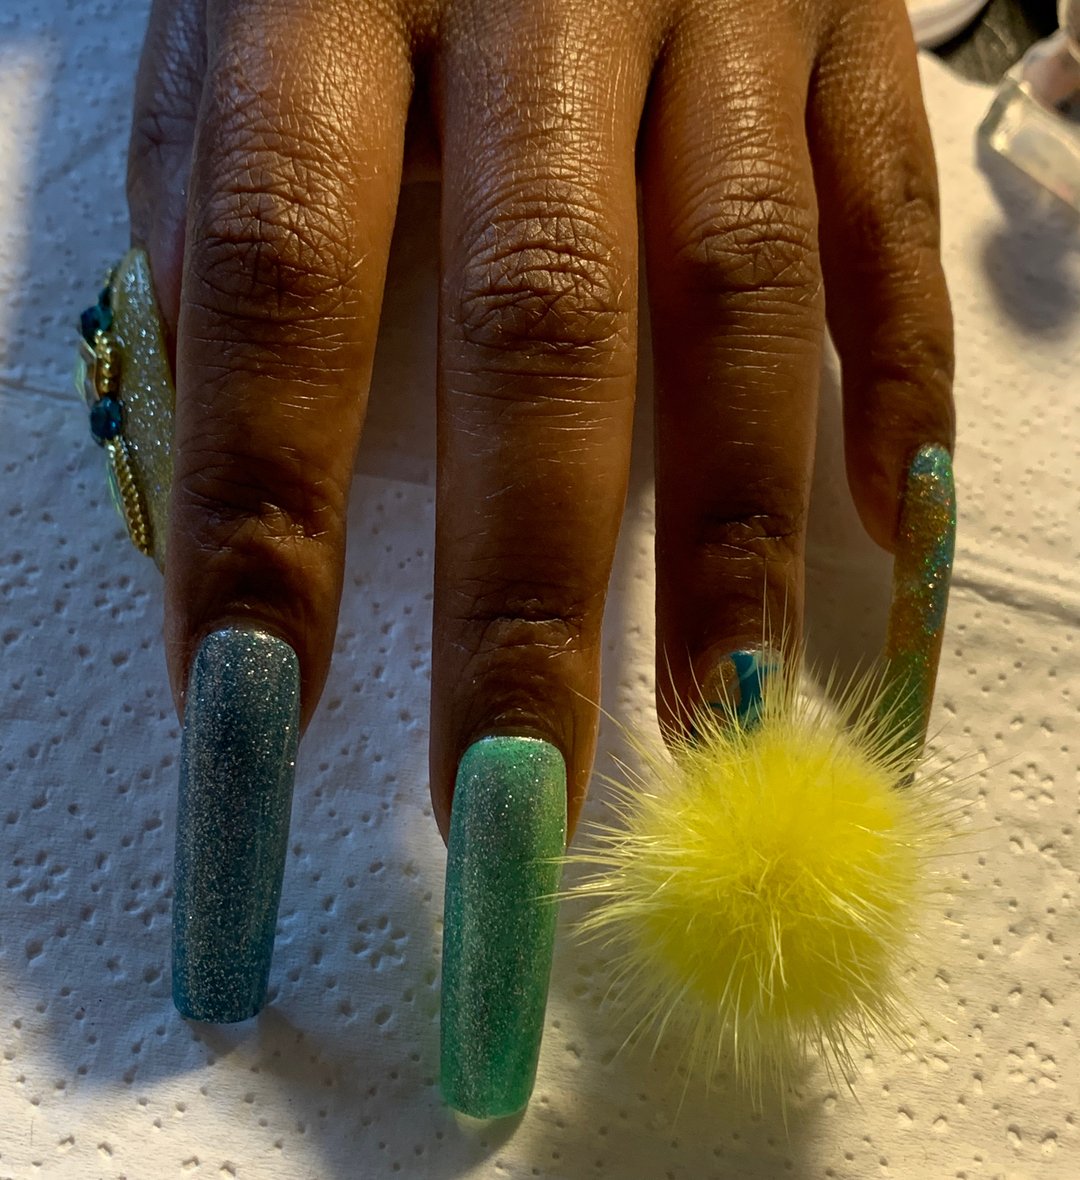 Custom press on sets available for order 💚💙. This set features a magnetic Pom Pom nail charm 😍Use code WELCOME for 15% off your first order❗️#pompomnailcharm #nailcharms #nailart #greennails #bluenails #clearnailcharms #nailaccessories tallynails #tallynailtech #tall